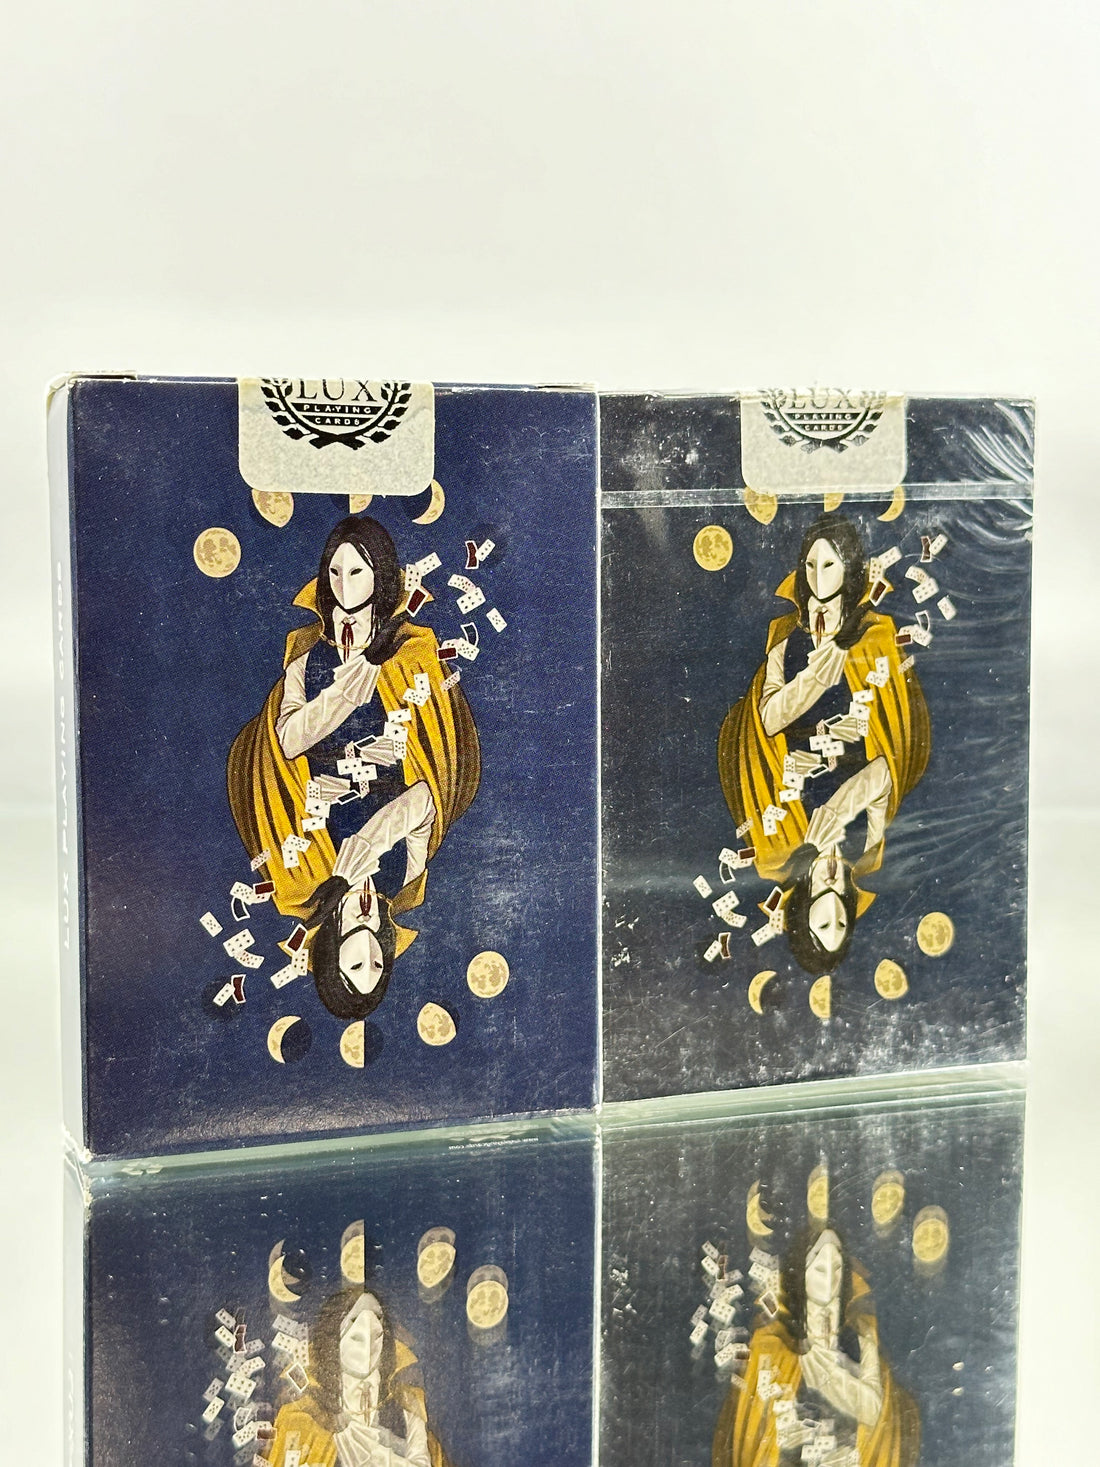 Bicycle Illusionist Playing Cards Set (Signed Blue, Black)